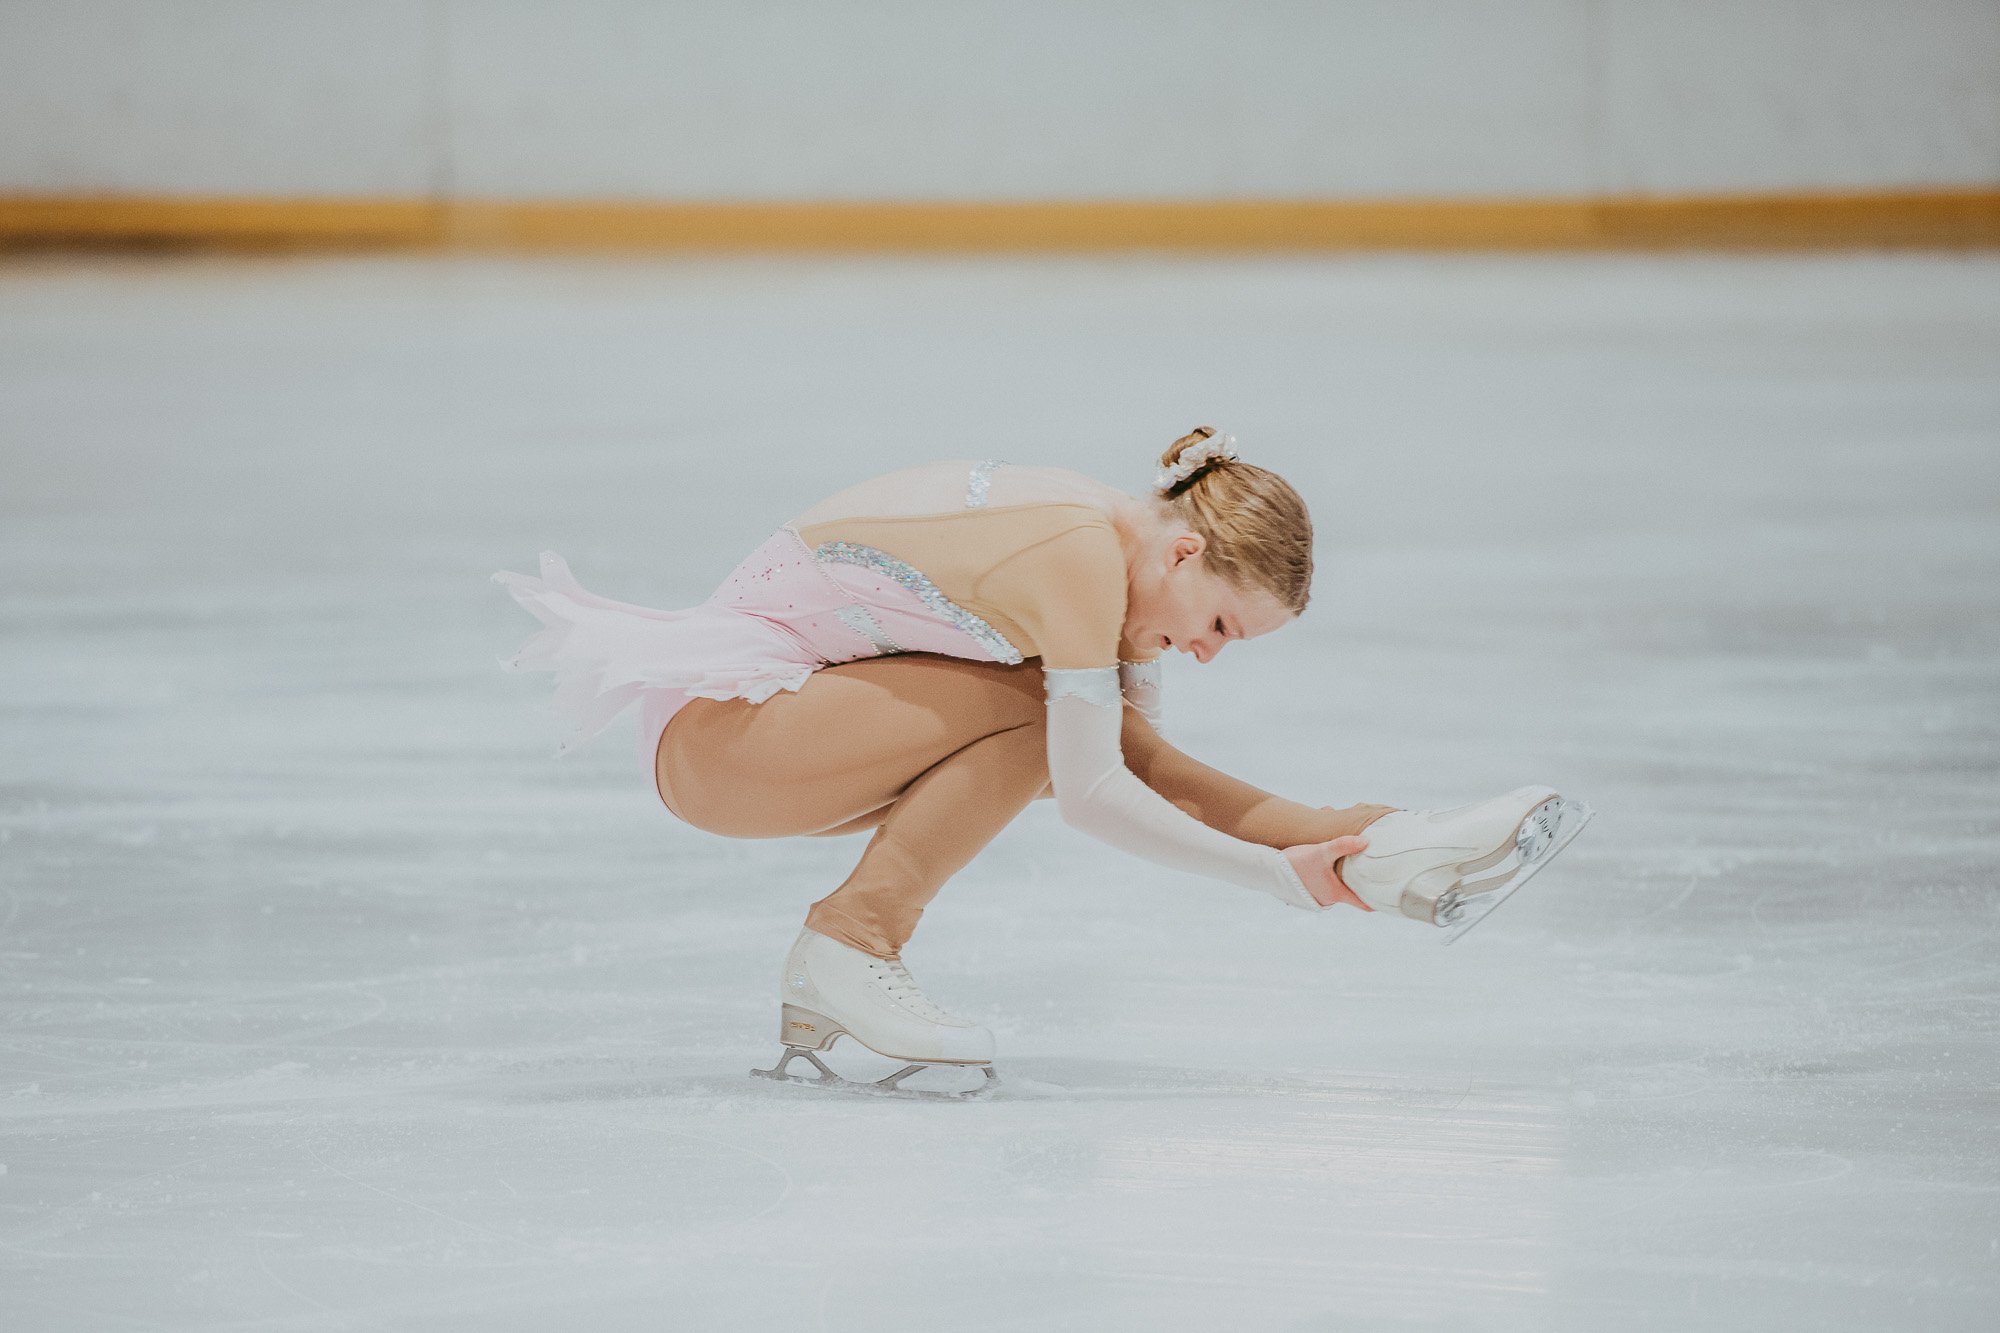 Nationals-ice skating_by_Levien-29.jpg